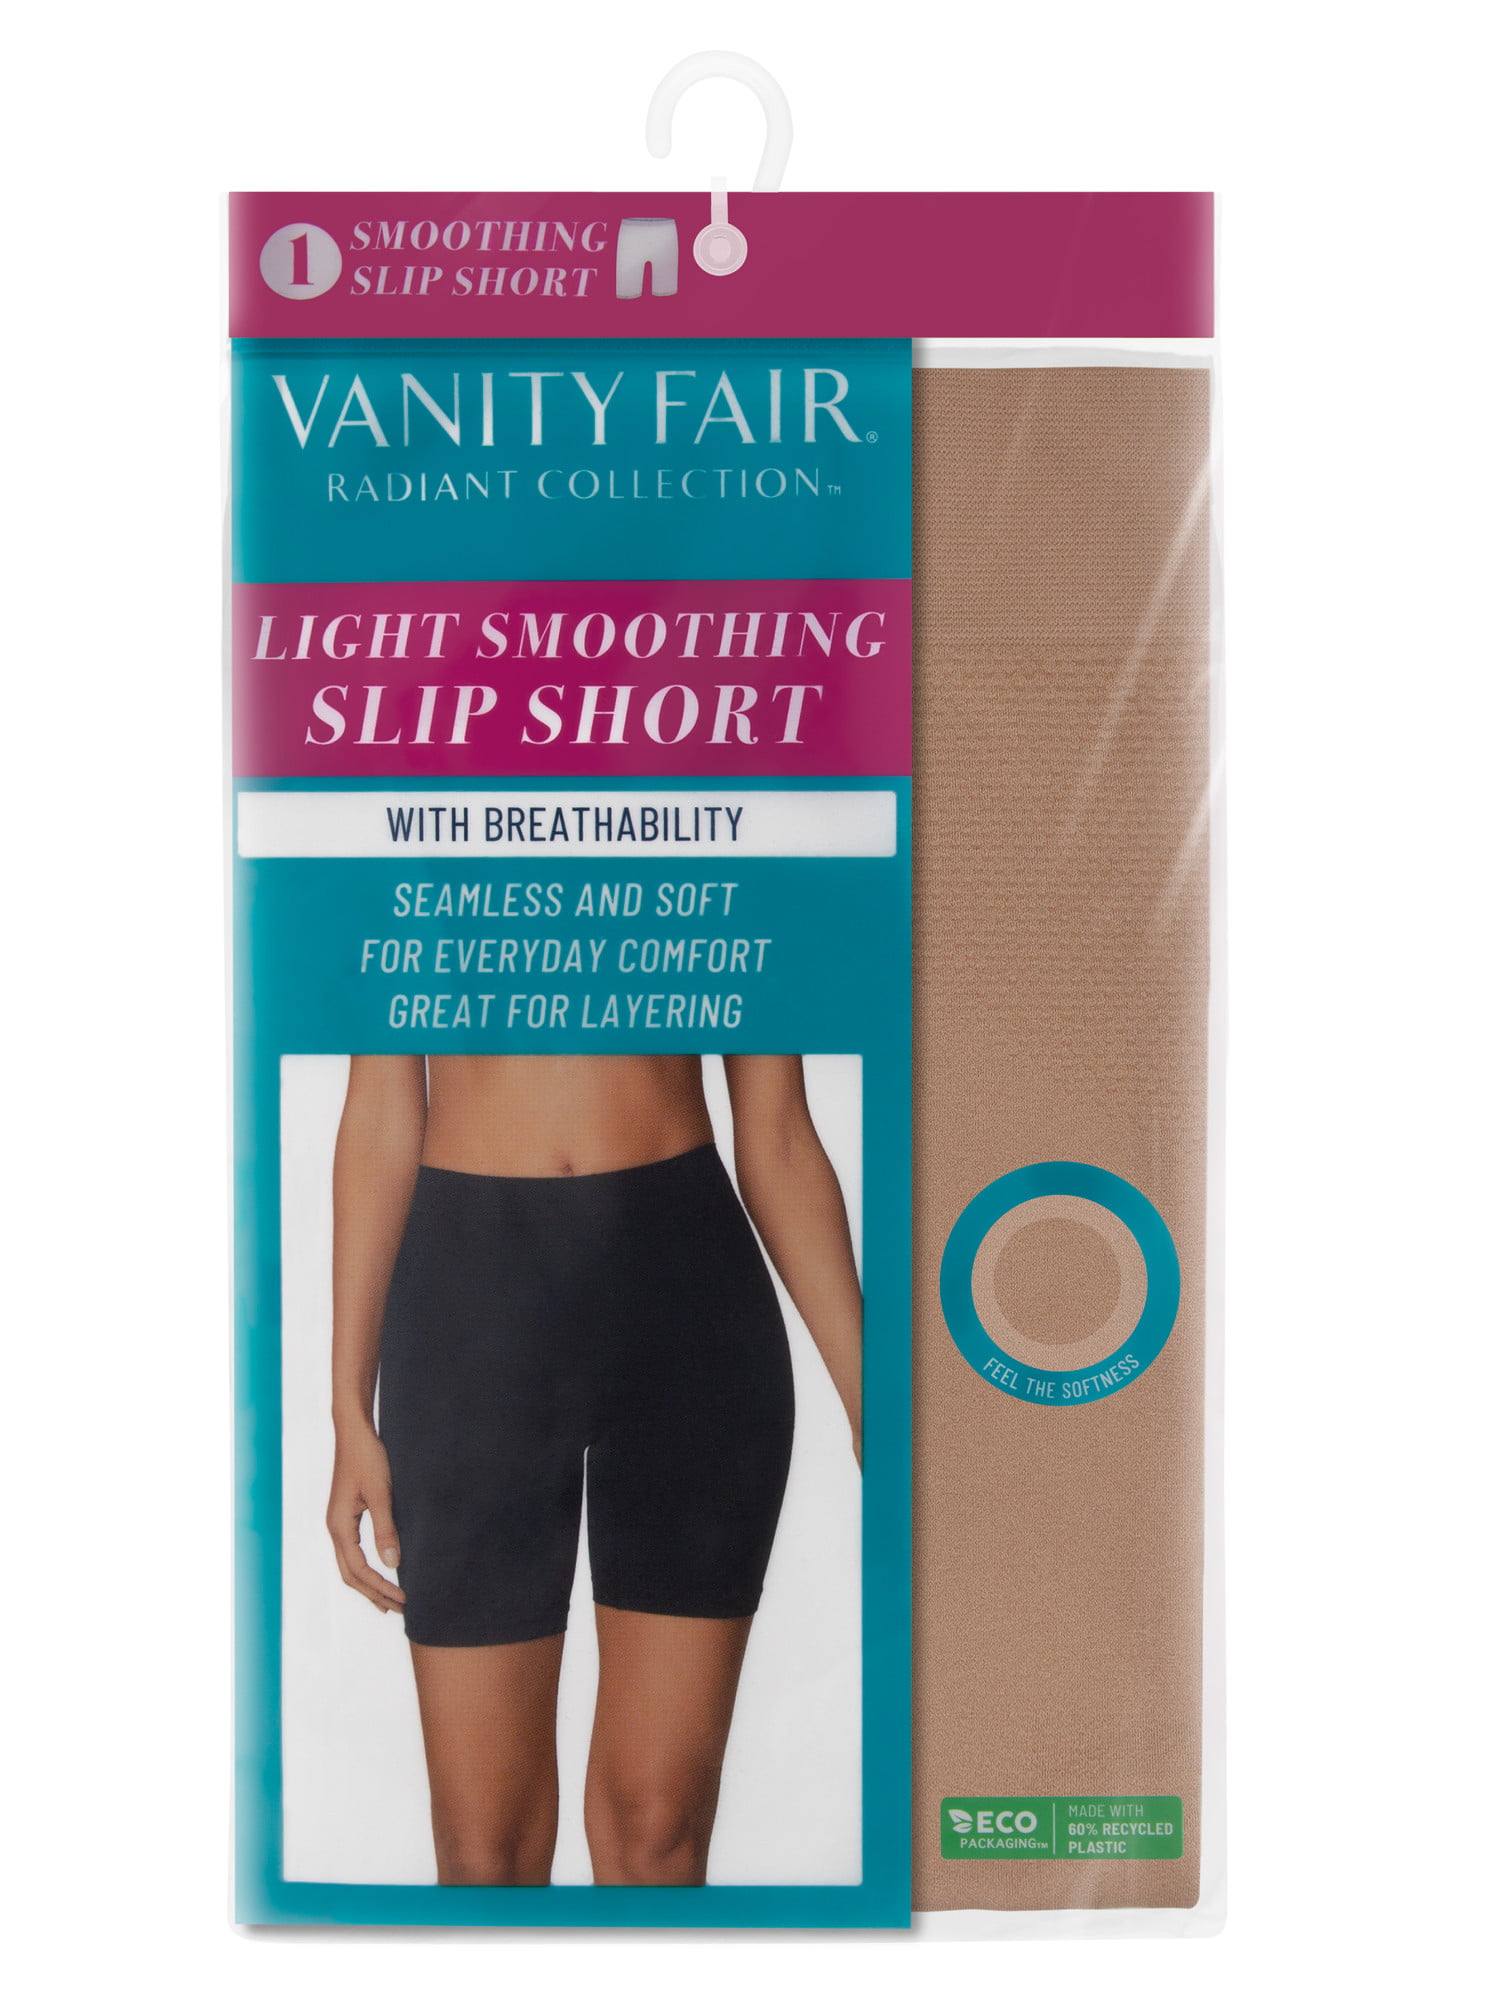 Vanity Fair Radiant Collection Women's Smooth Breathable Slip Short